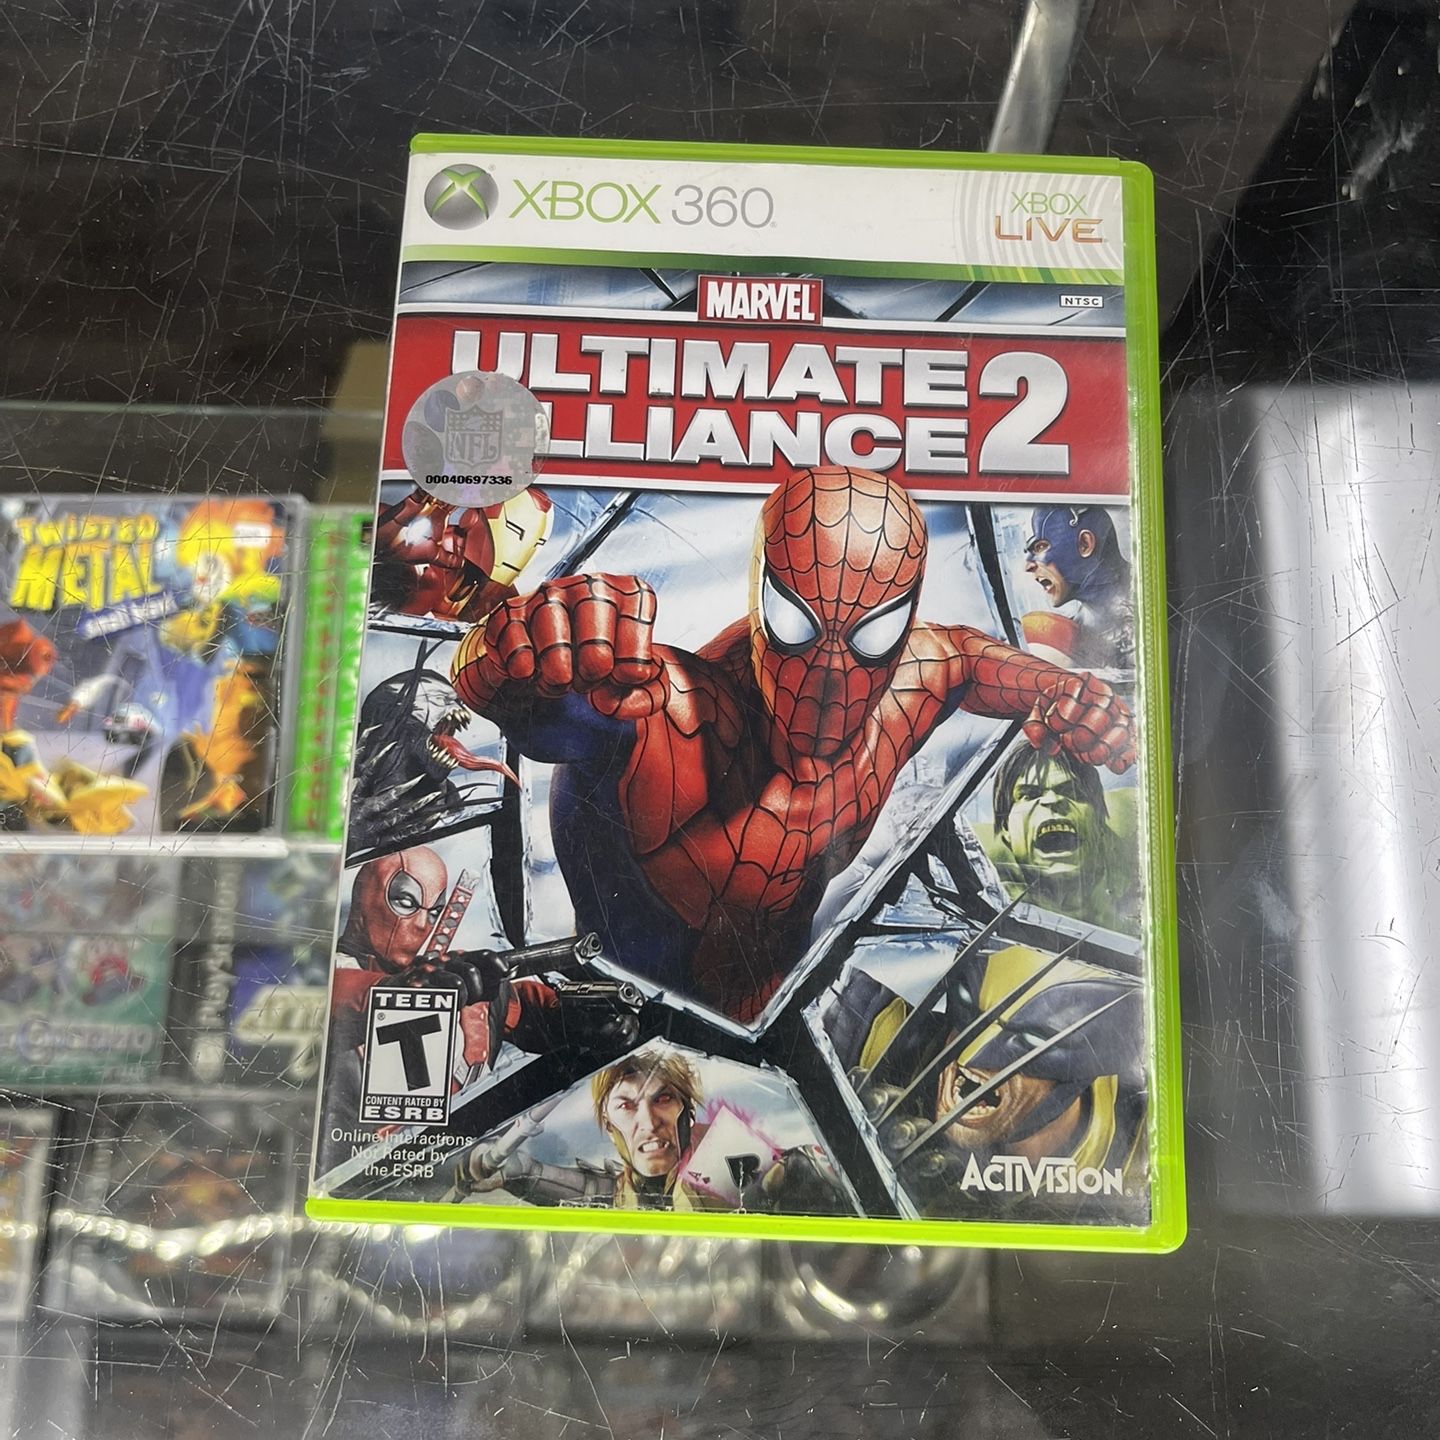 Marvel Ultimate Alliance Xbox 360 $45 Gamehogs 11am-7pm